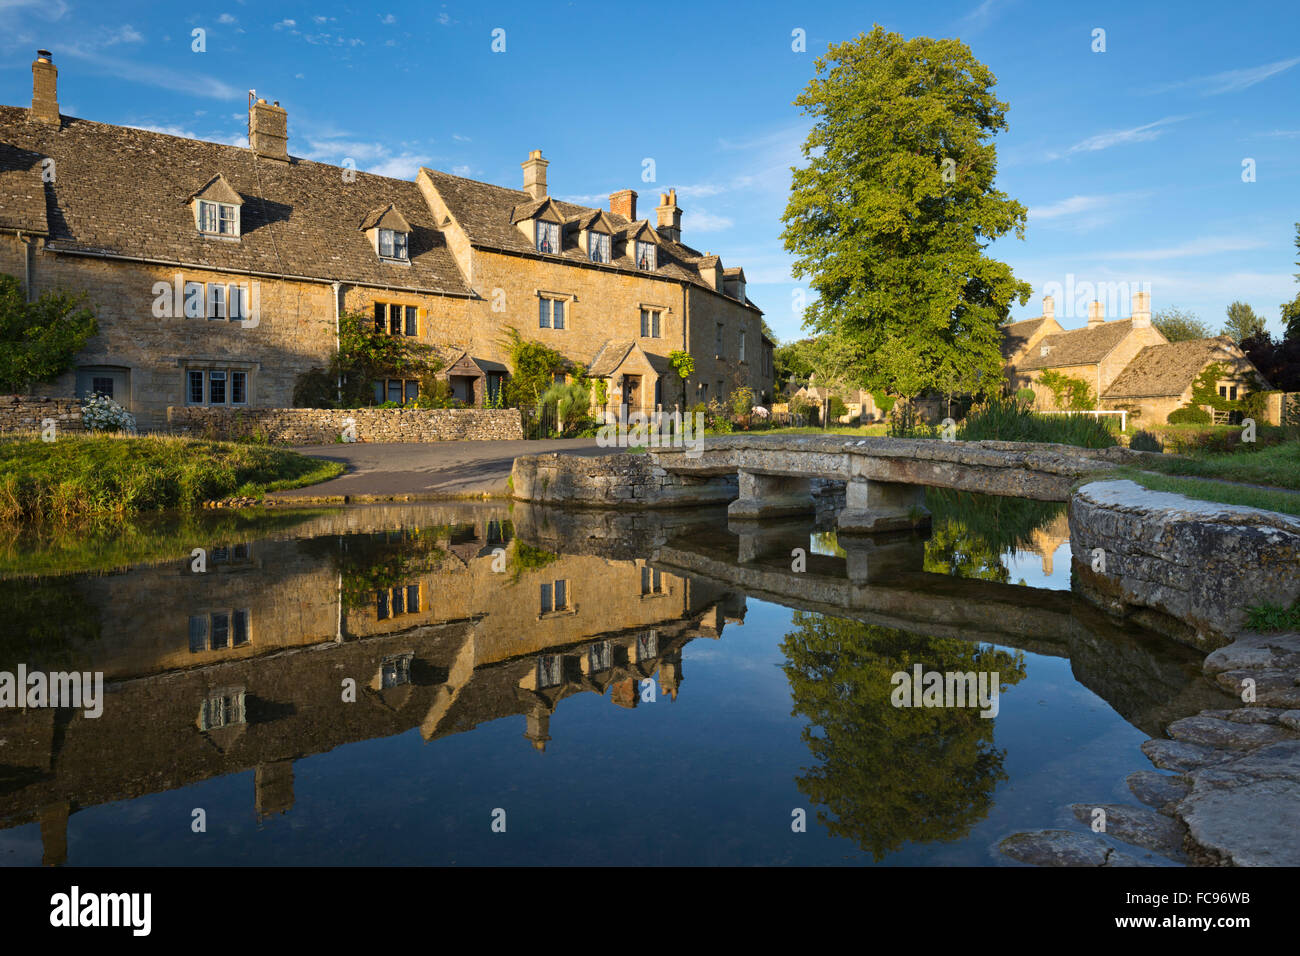 Stone bridge and cotswold cottages on River Eye, Lower Slaughter, Cotswolds, Gloucestershire, England, United Kingdom, Europe Stock Photo